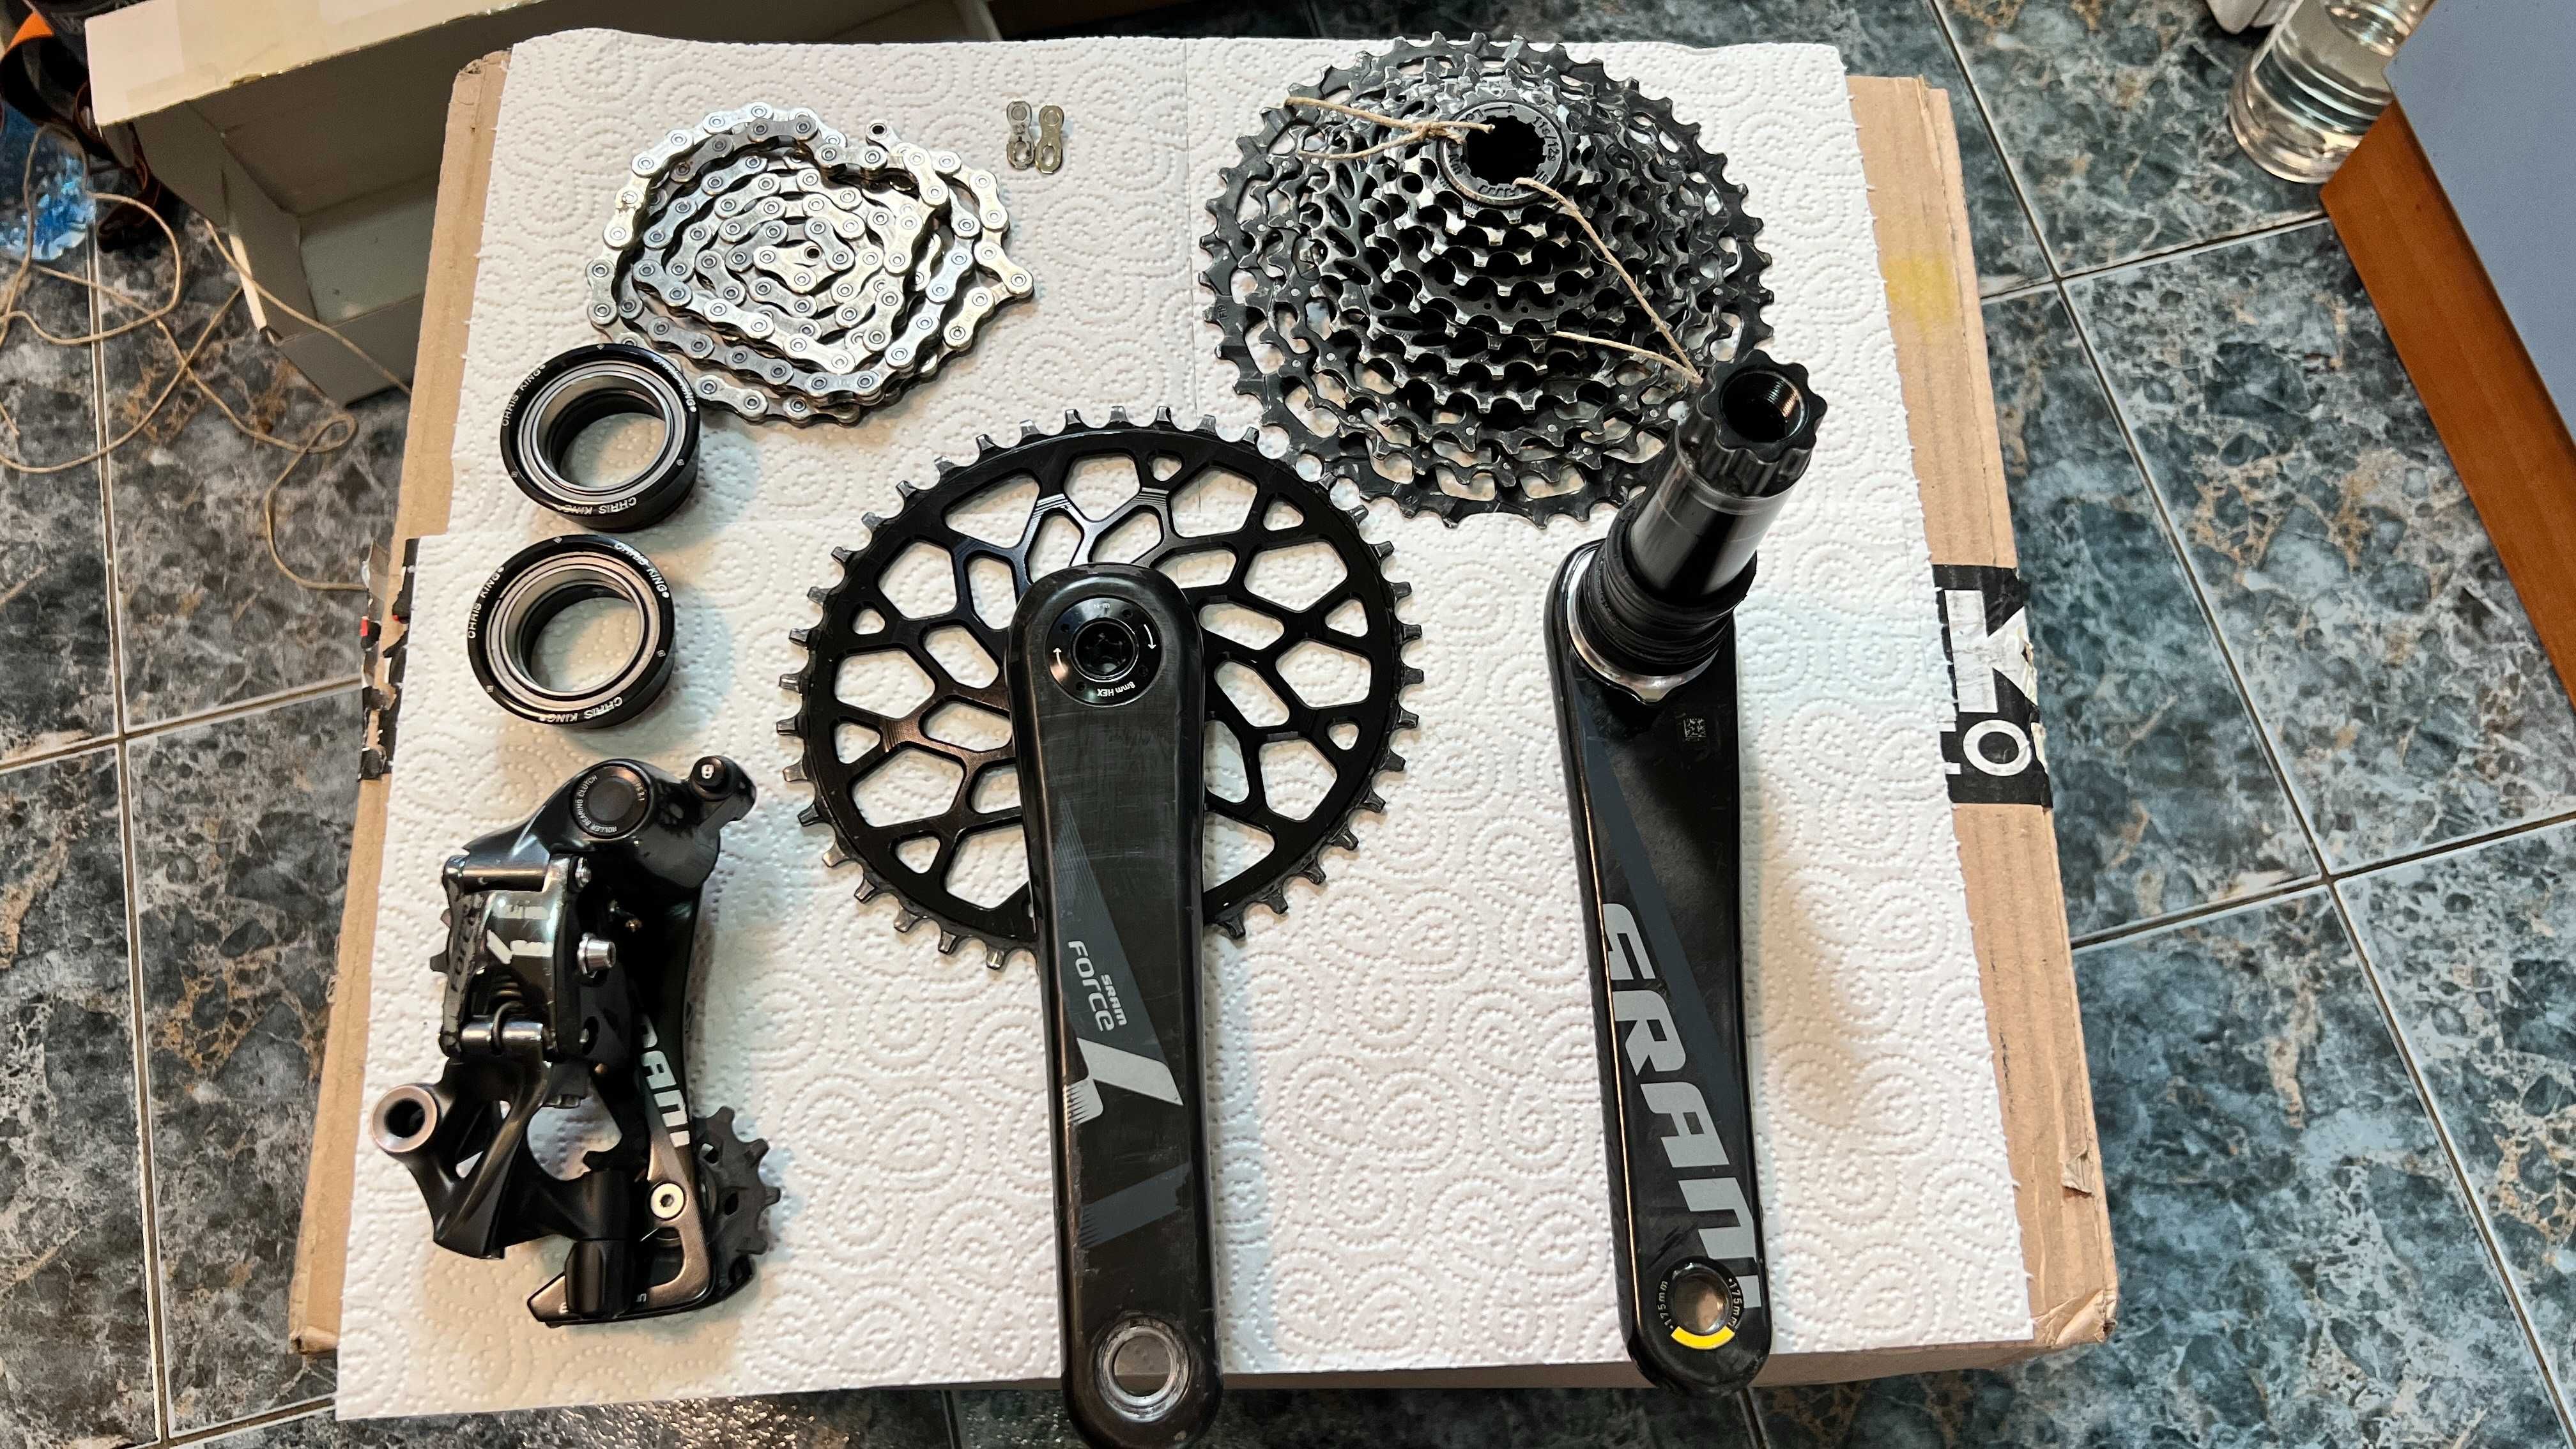 Groupset complet Sram Force CX1 1x11